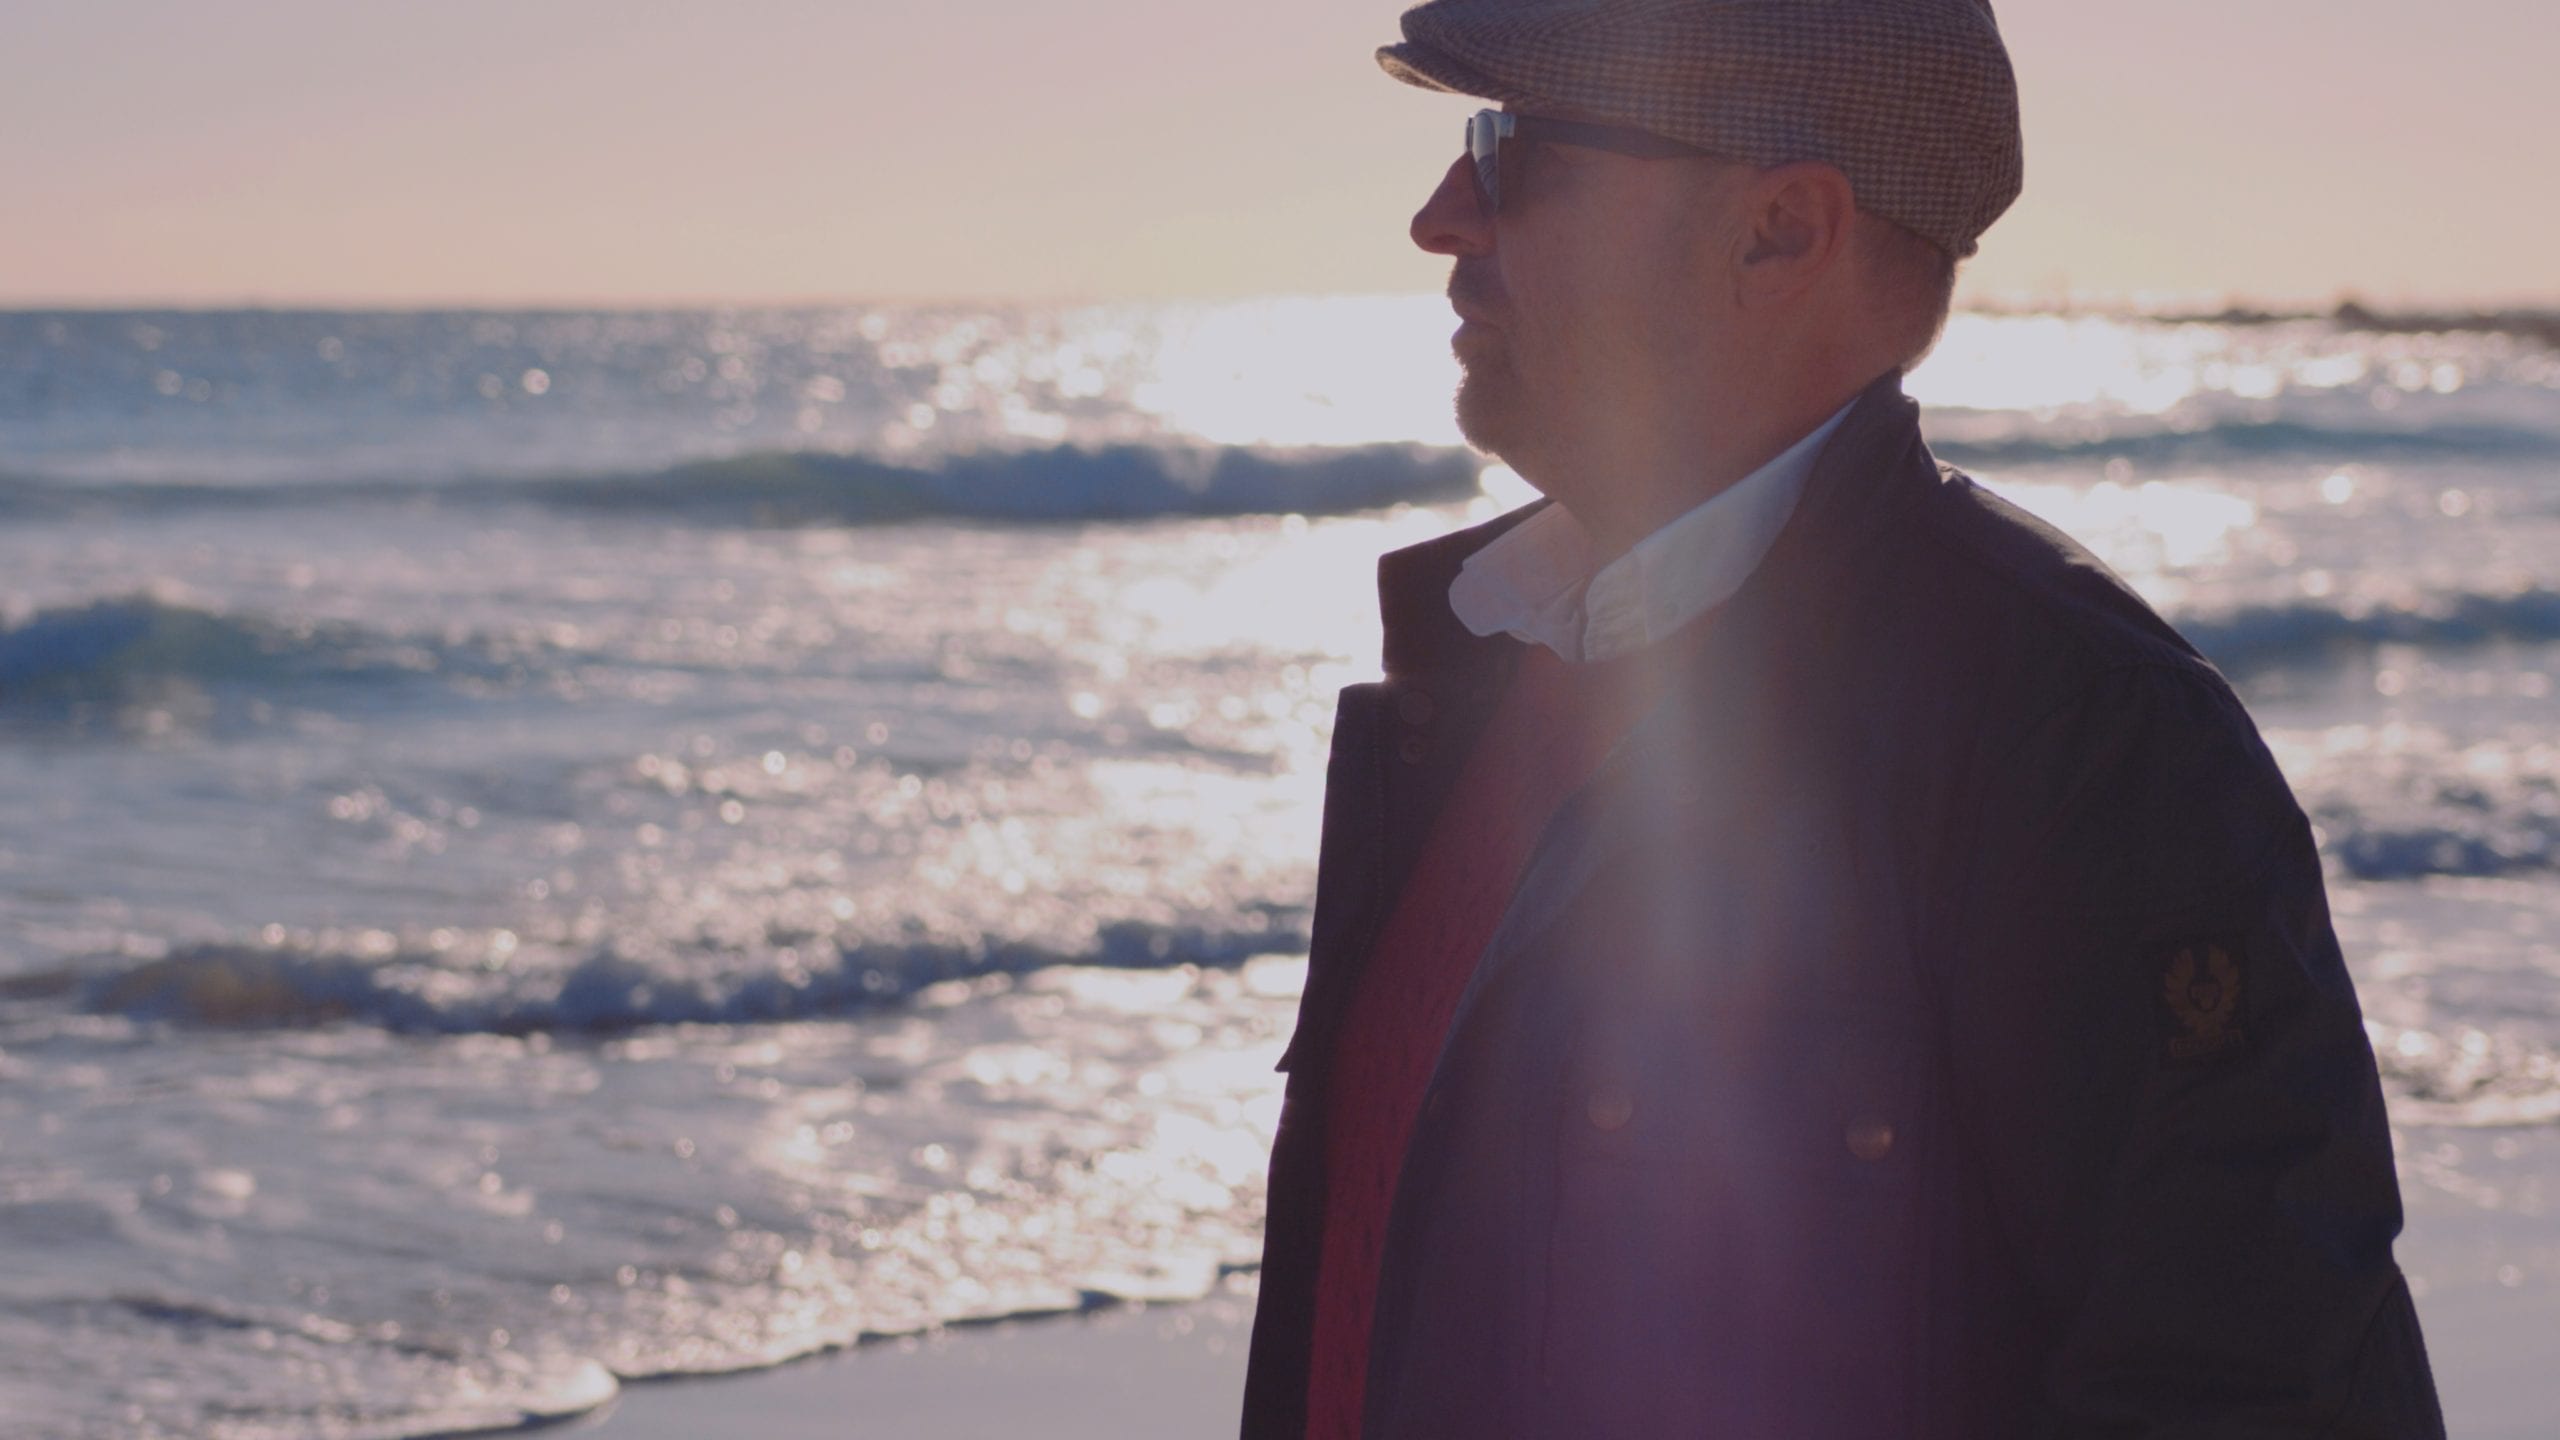 Side profile of man wearing a cap, sunglasses, red sweater and blue jacket standing on a beach